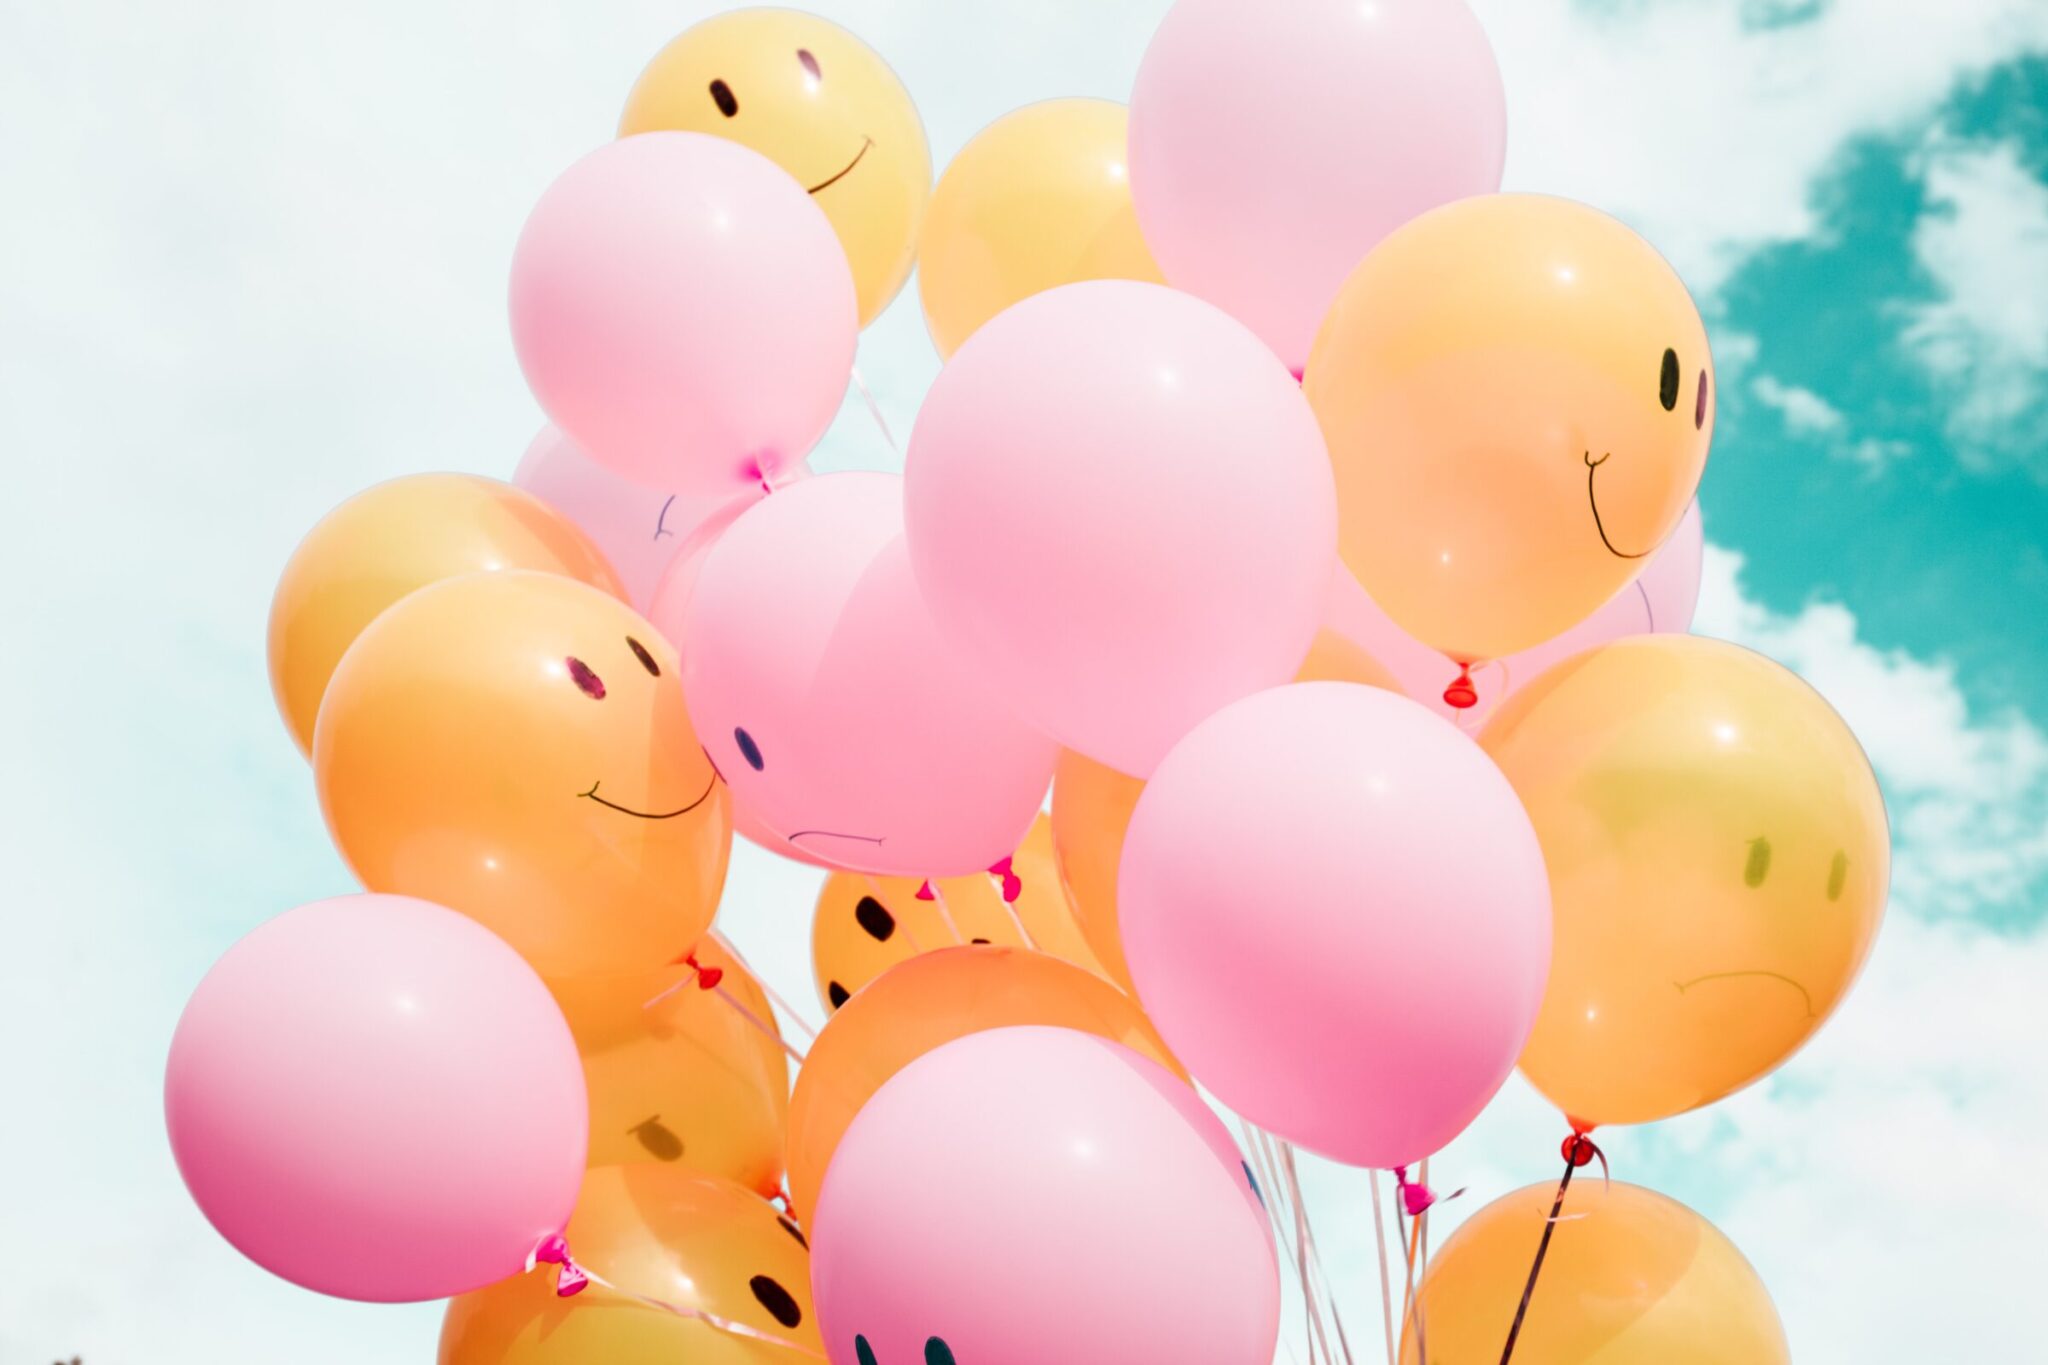 balloons with happy face to illustrate a happy successful transition of adult children and aging parents living together